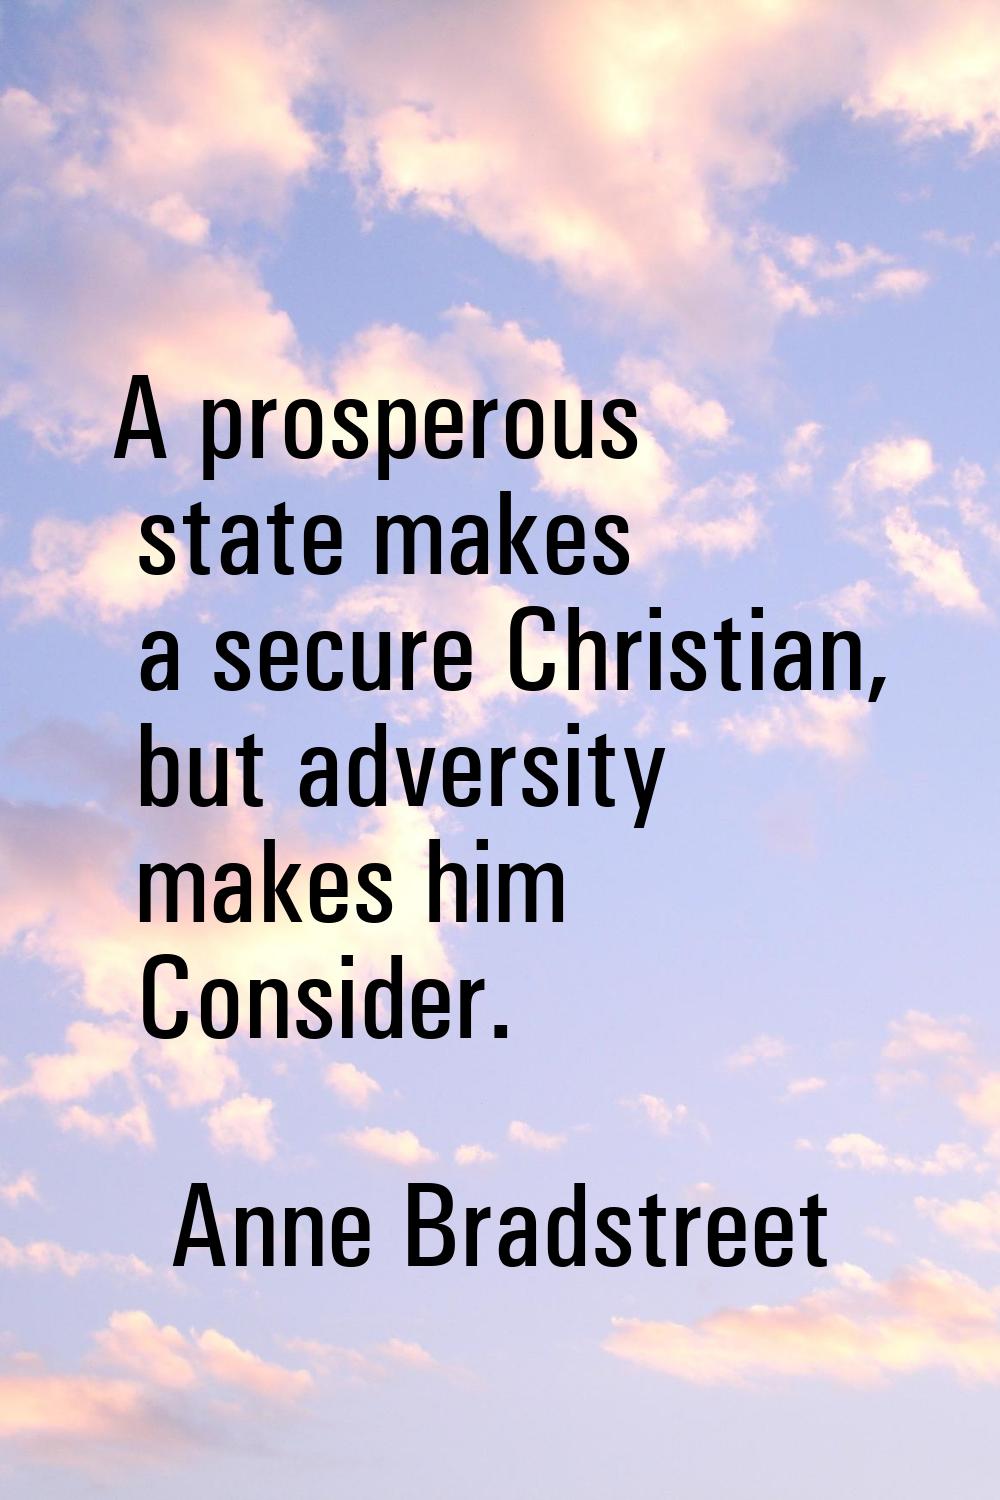 A prosperous state makes a secure Christian, but adversity makes him Consider.